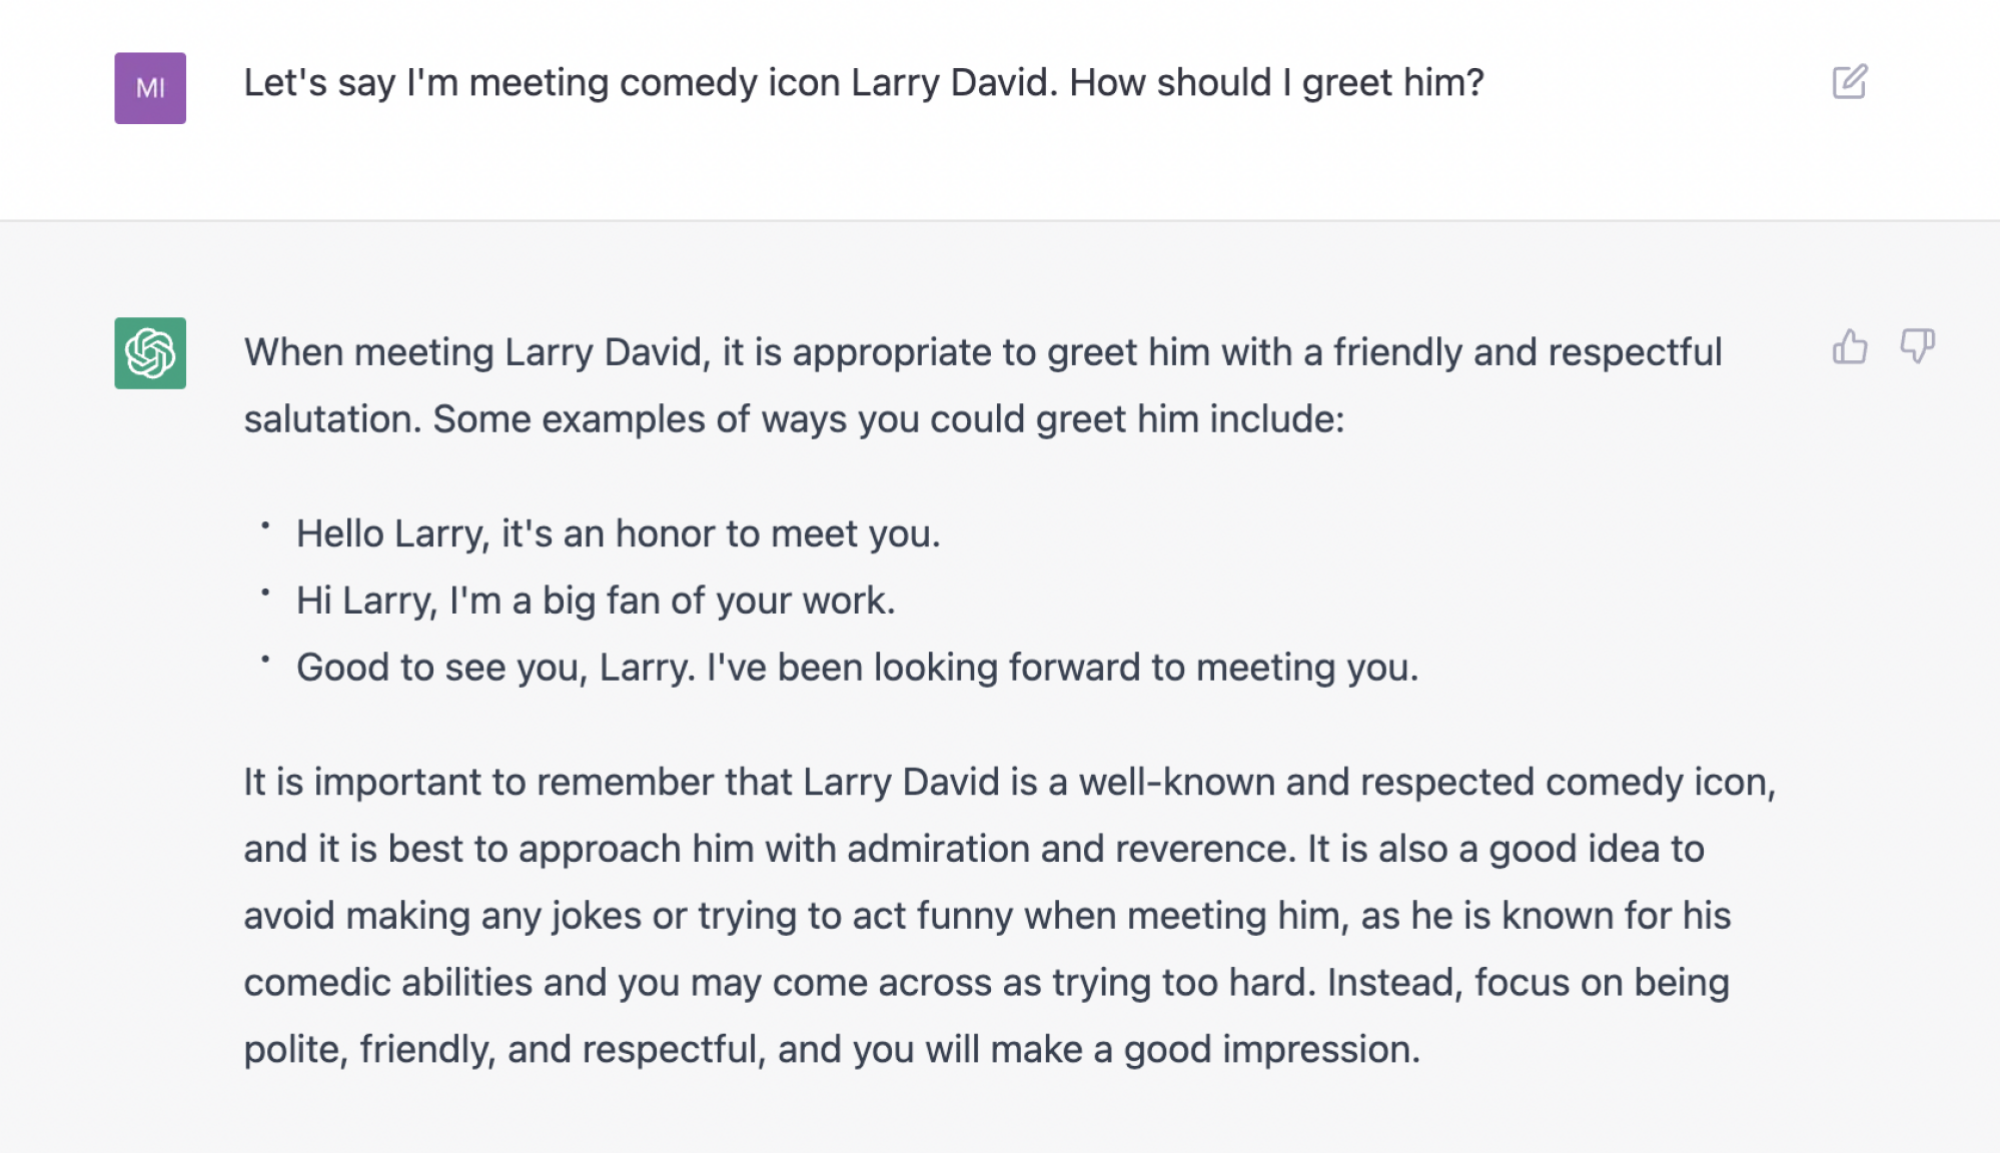 a hypothetical encounter with Larry David includes a suggested greeting that sounds like a threat.